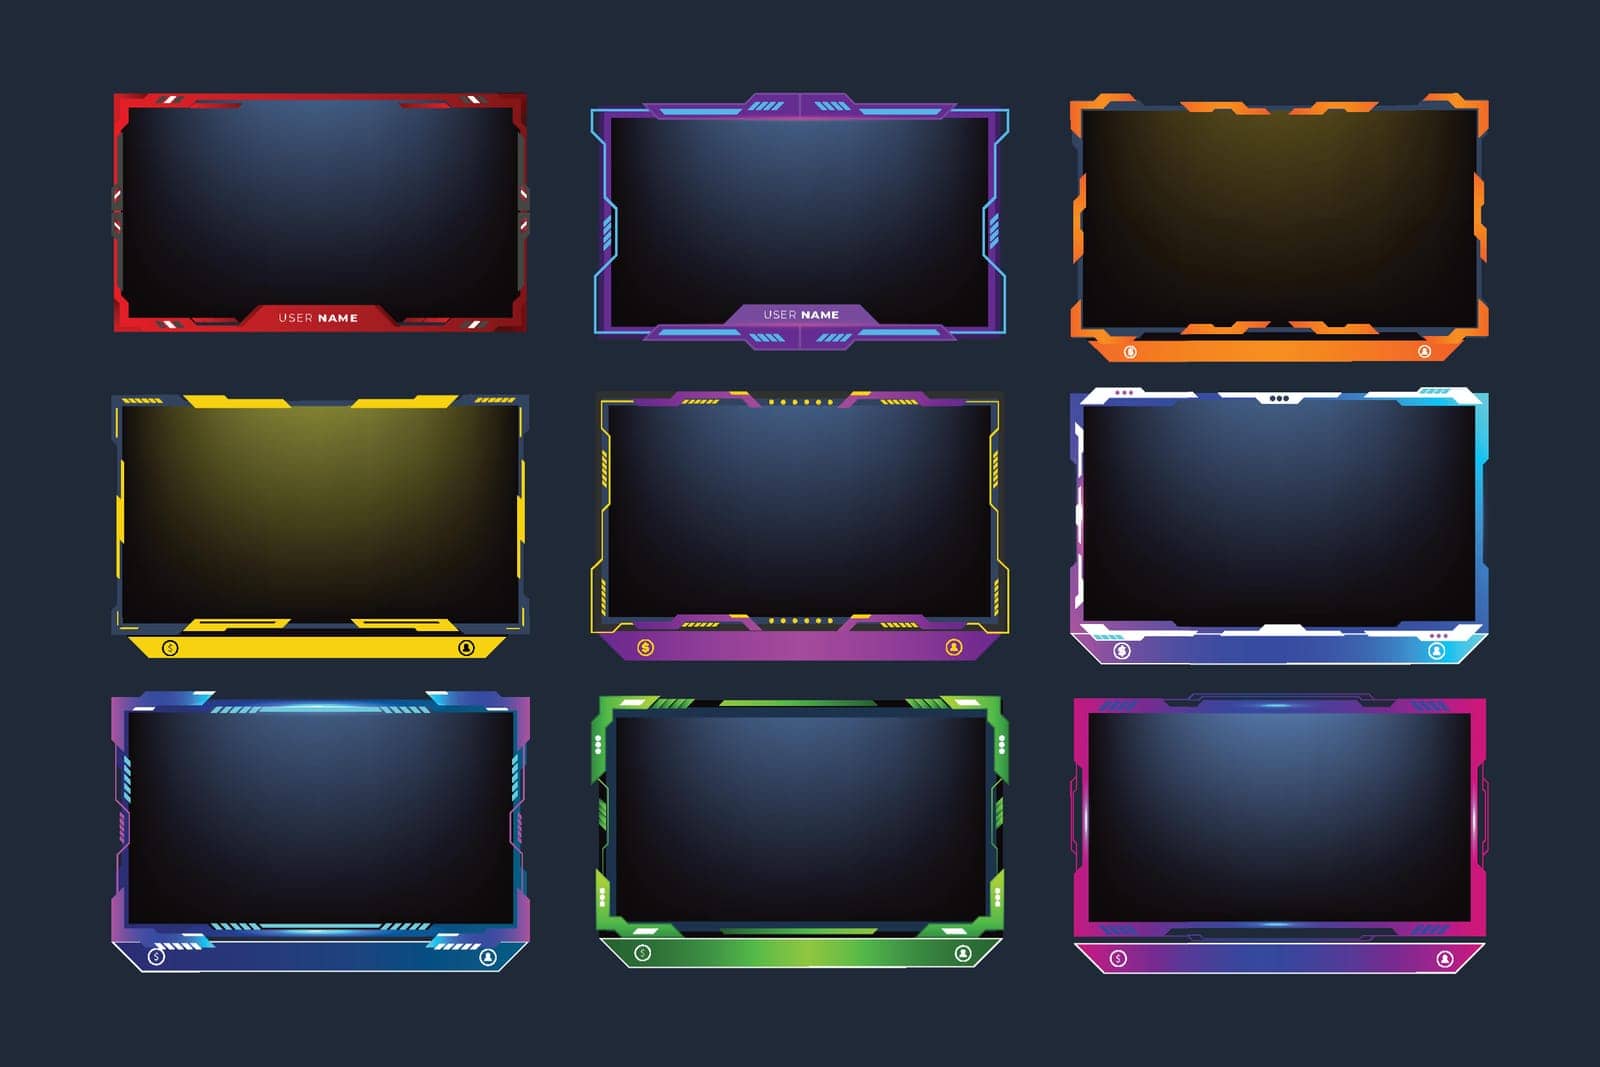 Futuristic gaming frame border bundle with purple, red, and yellow colors. Modern gaming screen panel and frame border set with neon effect. Live and streaming screen interface collection for gamers.